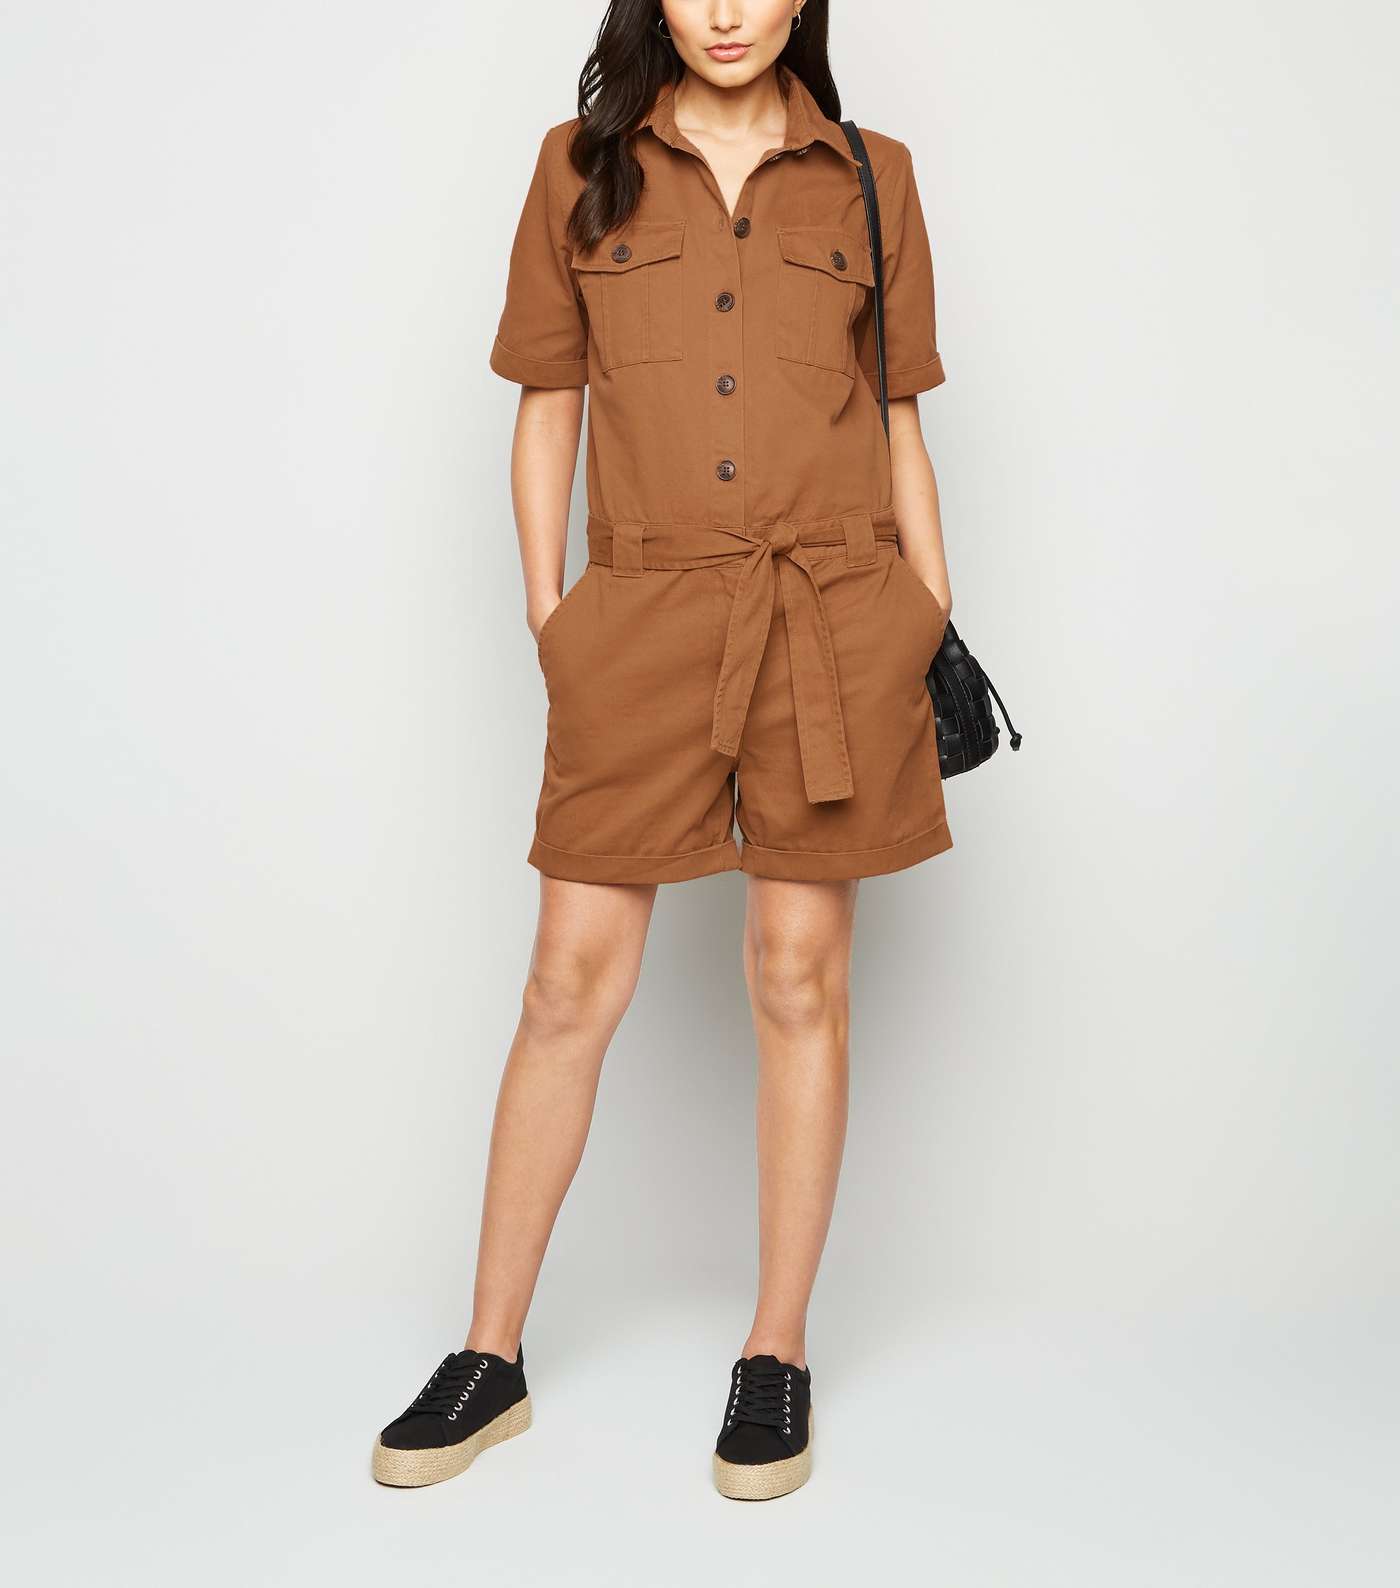 JDY Tan Button-Up Belted Playsuit Image 2